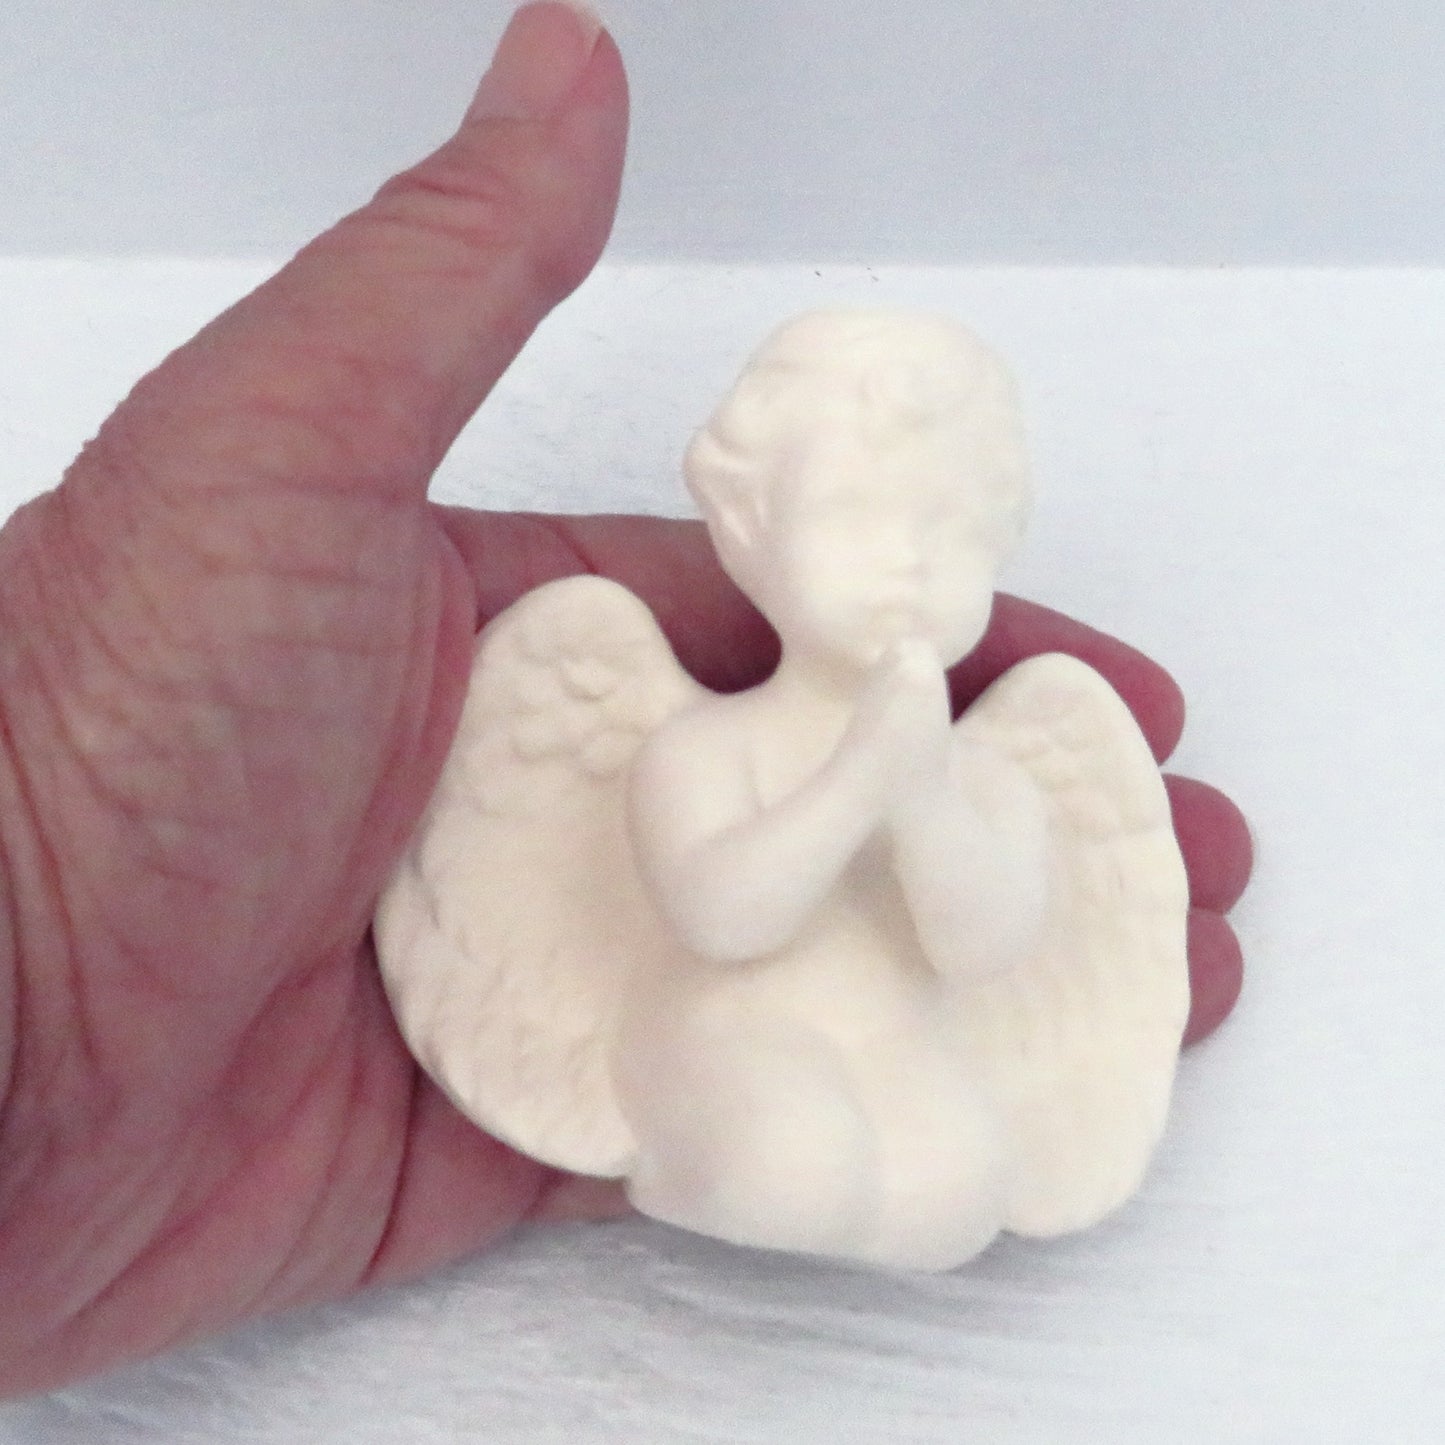 Unpainted ceramic cherub angel with hands folded in my hand showing size